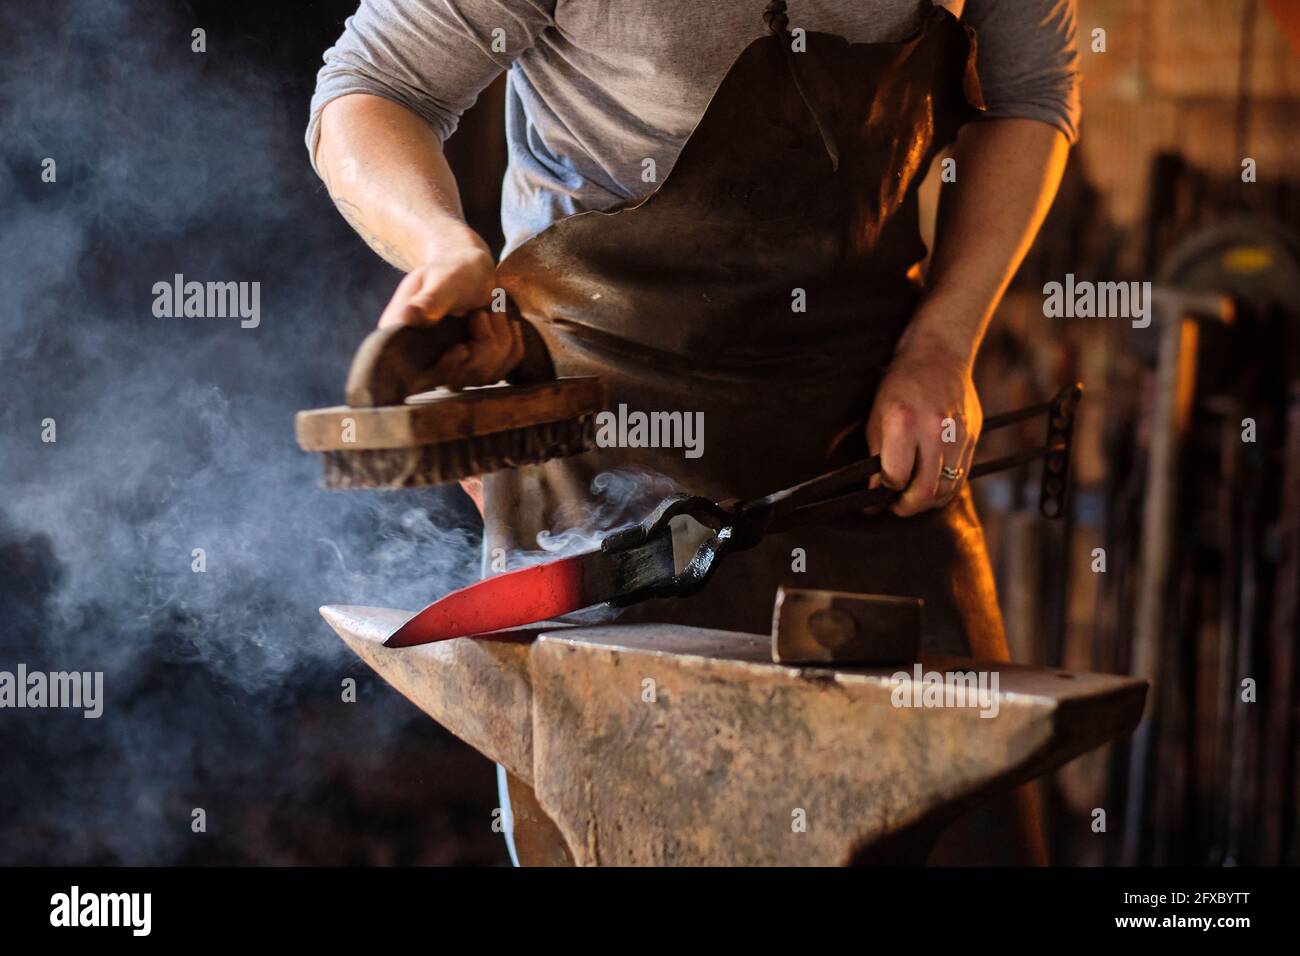 Young male craftsperson preparing metal knife on anvil at workshop Stock Photo